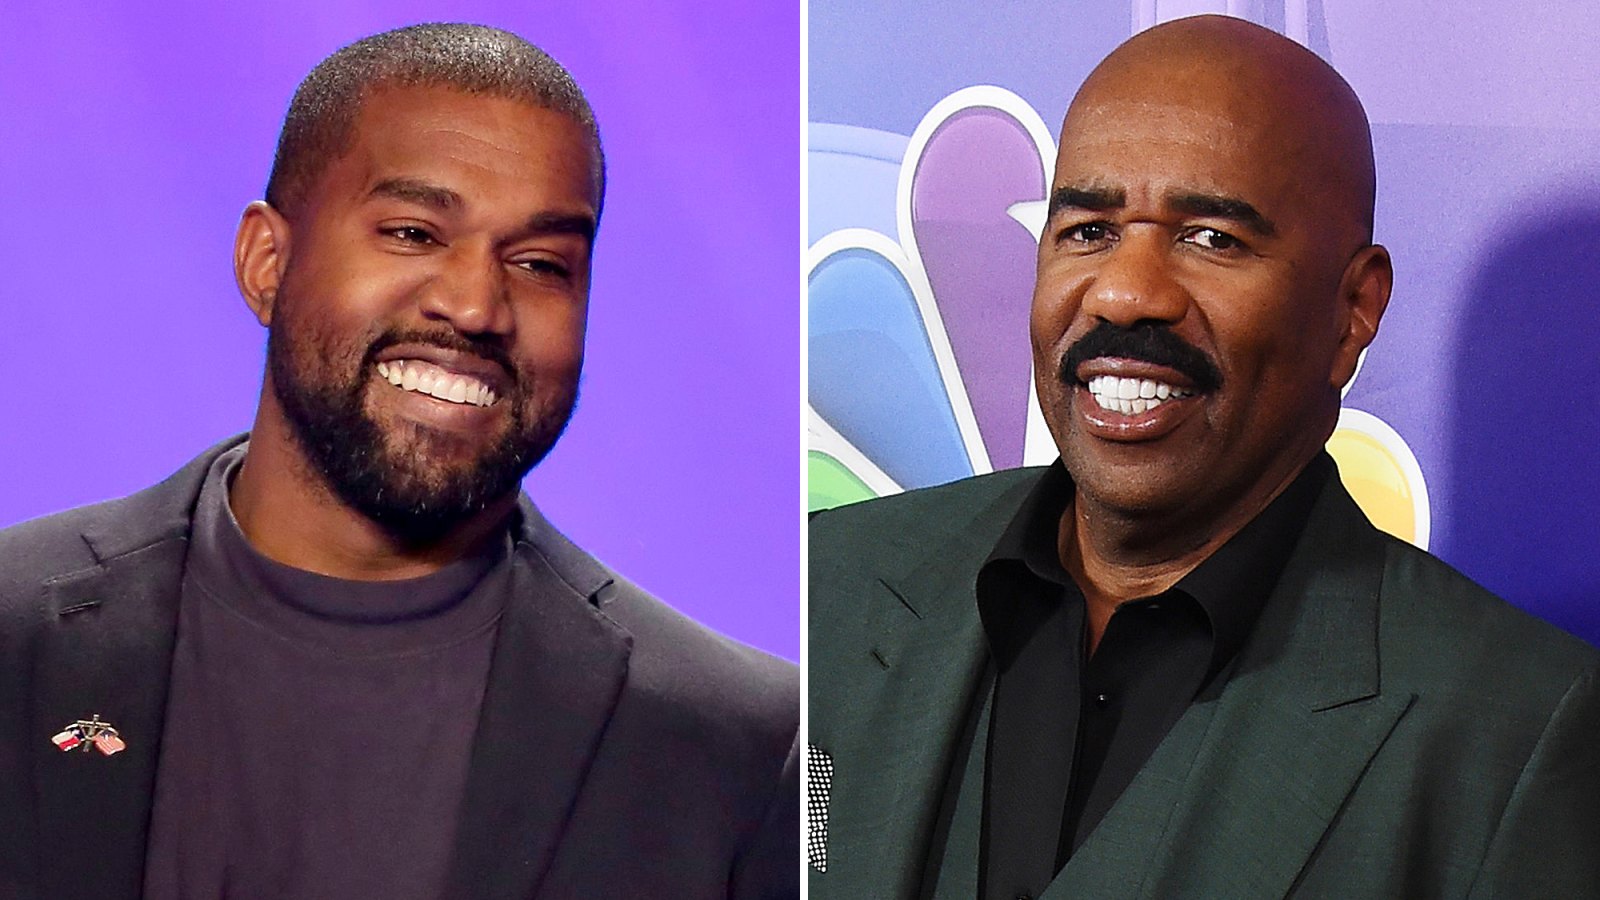 Kanye West Hangs With Steve Harvey After Family Drama